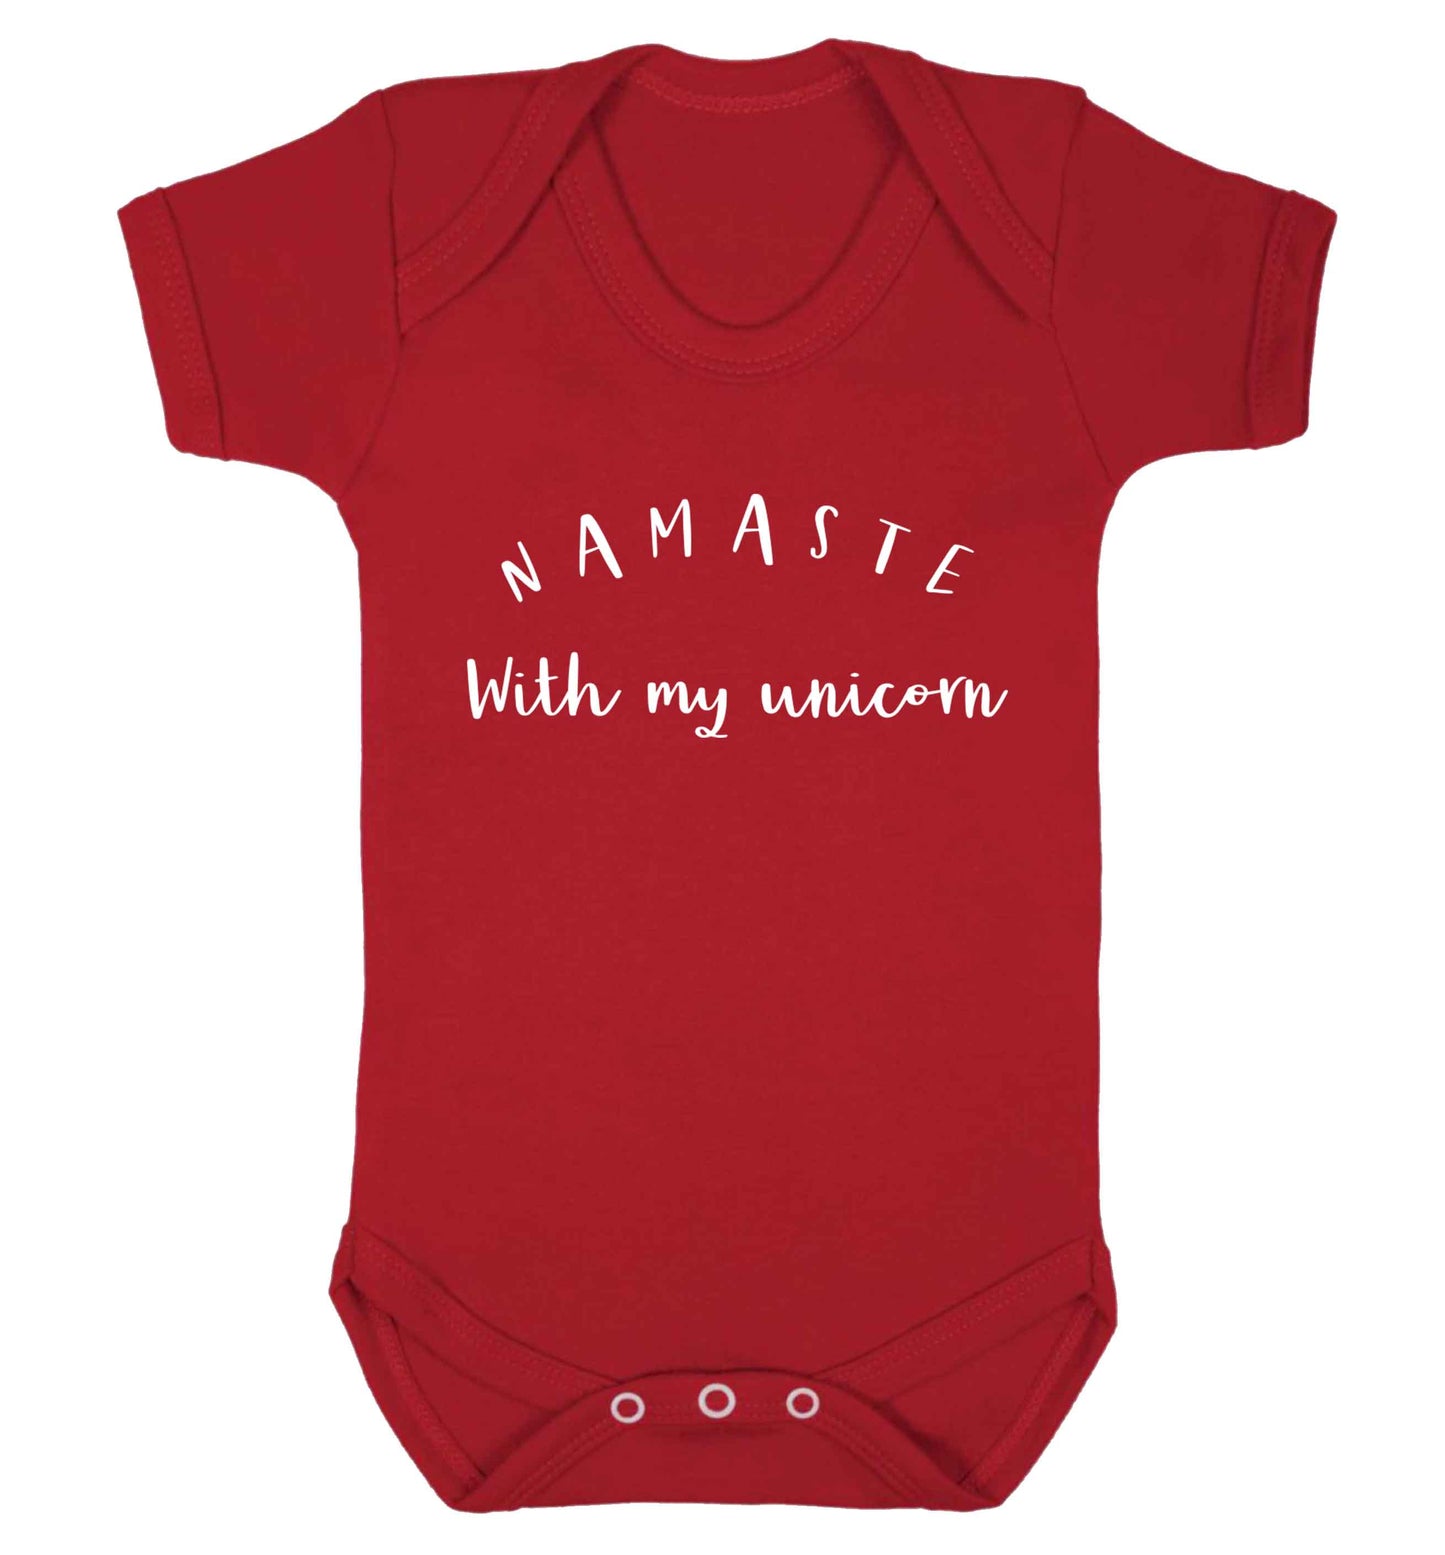 Namaste with my unicorn Baby Vest red 18-24 months